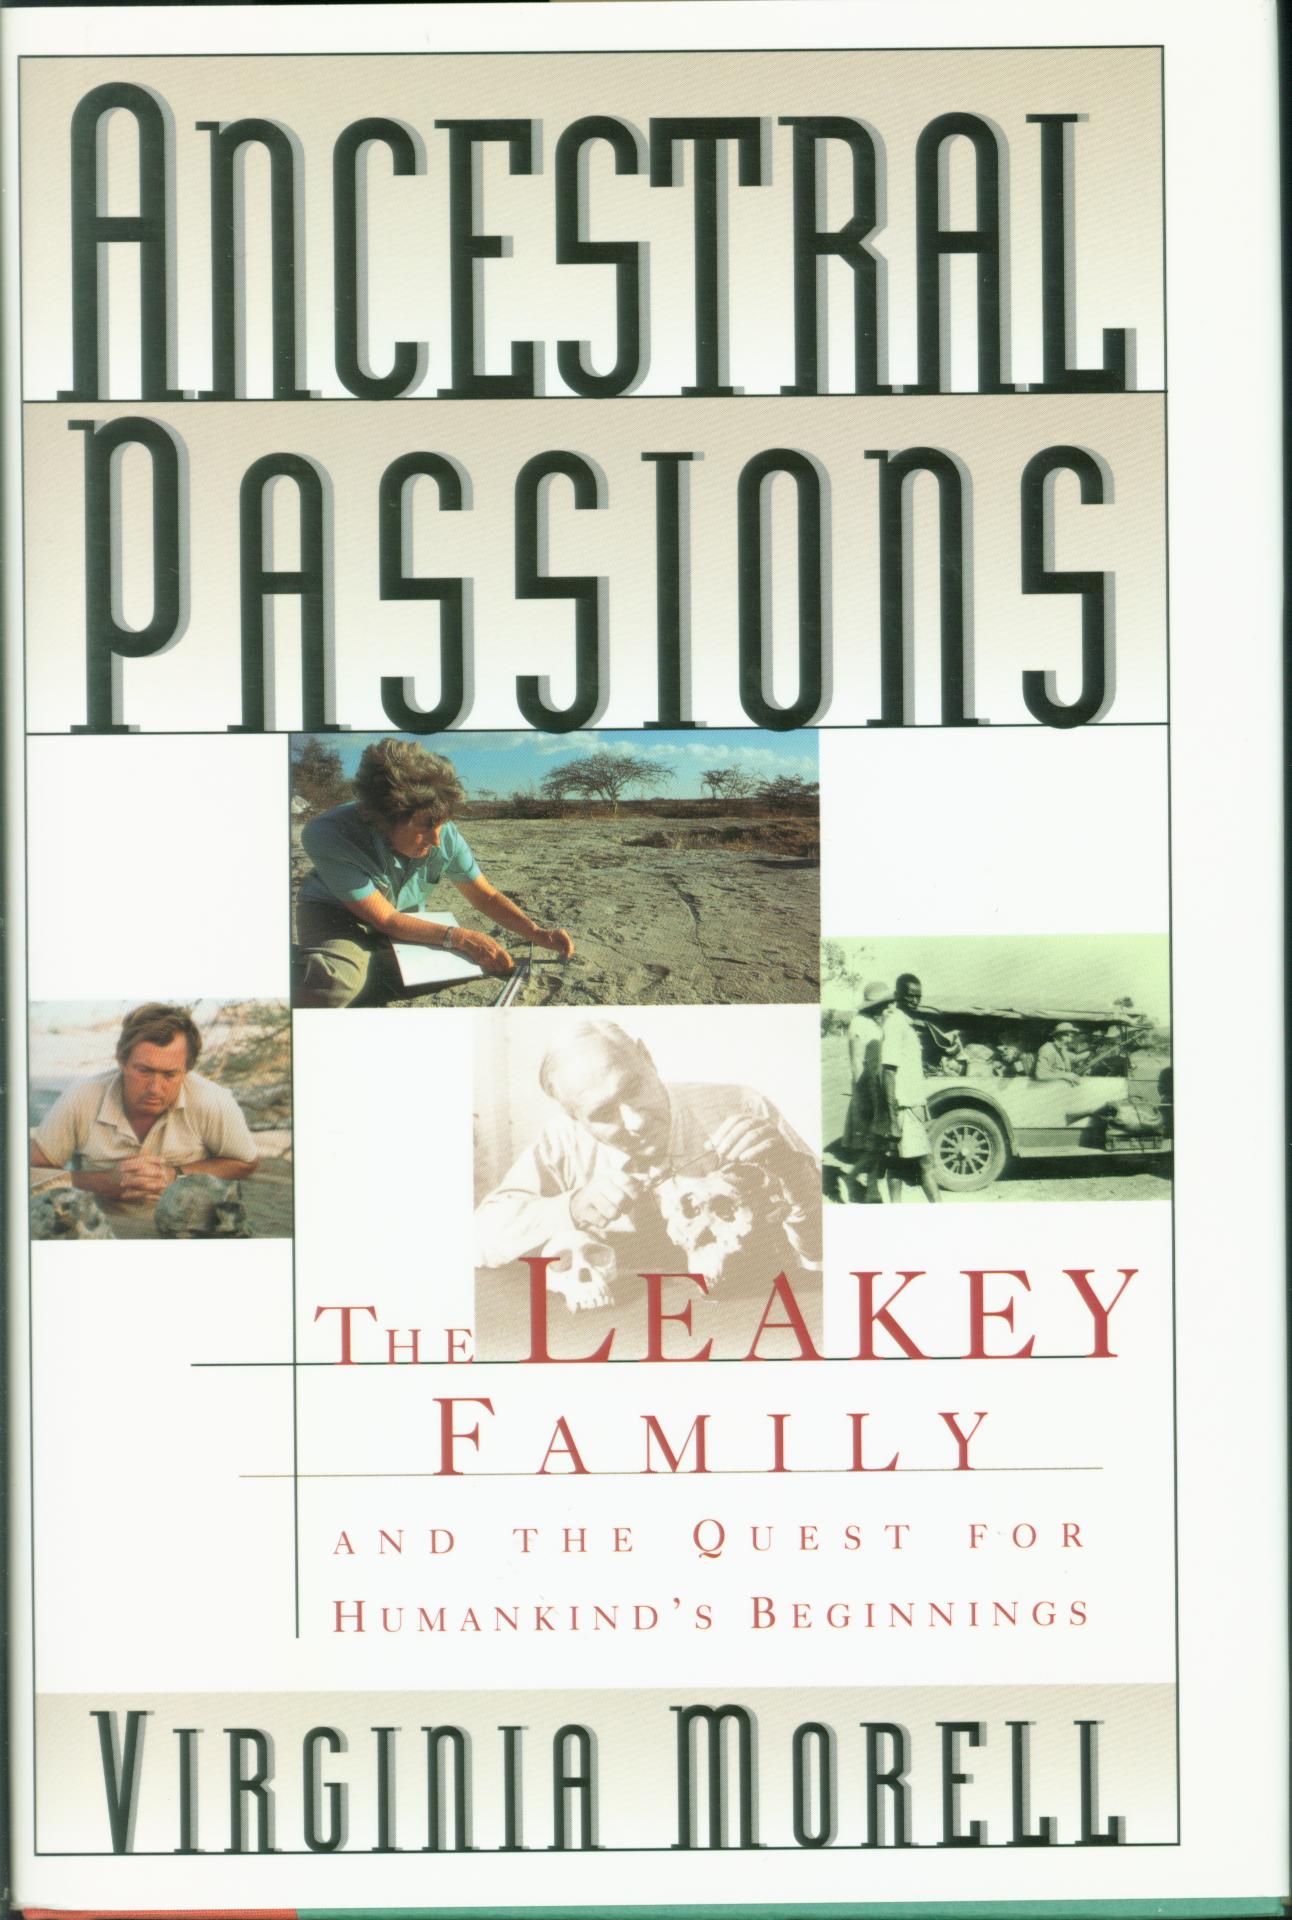 ANCESTRAL PASSIONS: the Leakey family and the quest for humankind's beginnings--cloth.